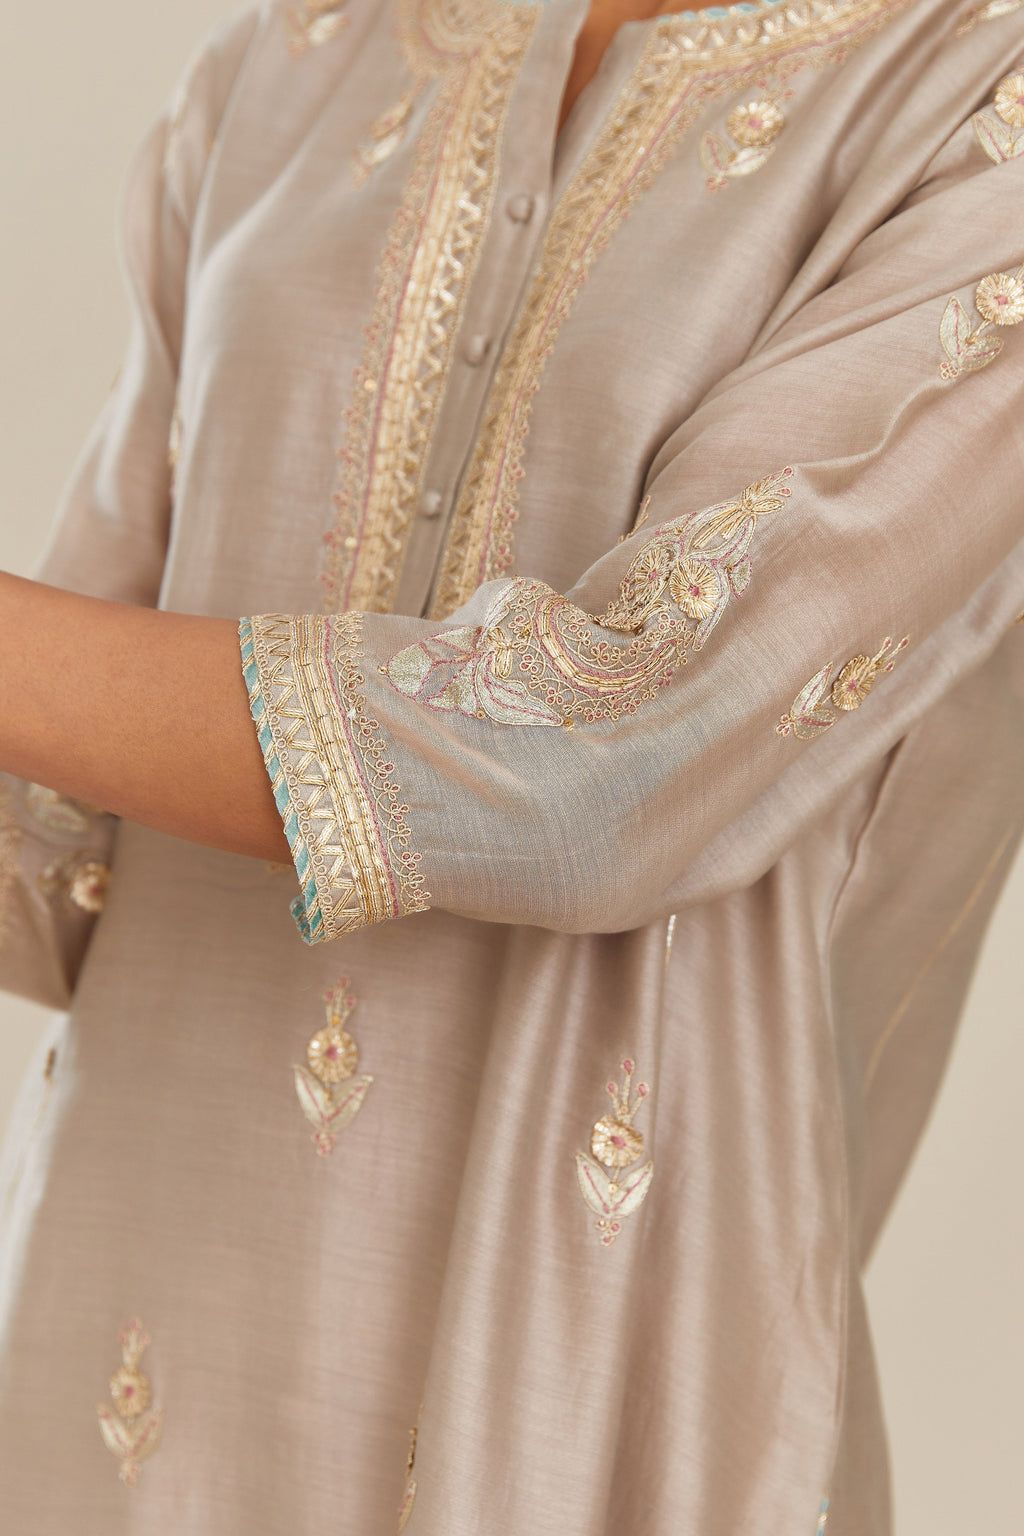 Grey silk chanderi kurta set with side panels, highlighted with gold gota and zari embroidery.